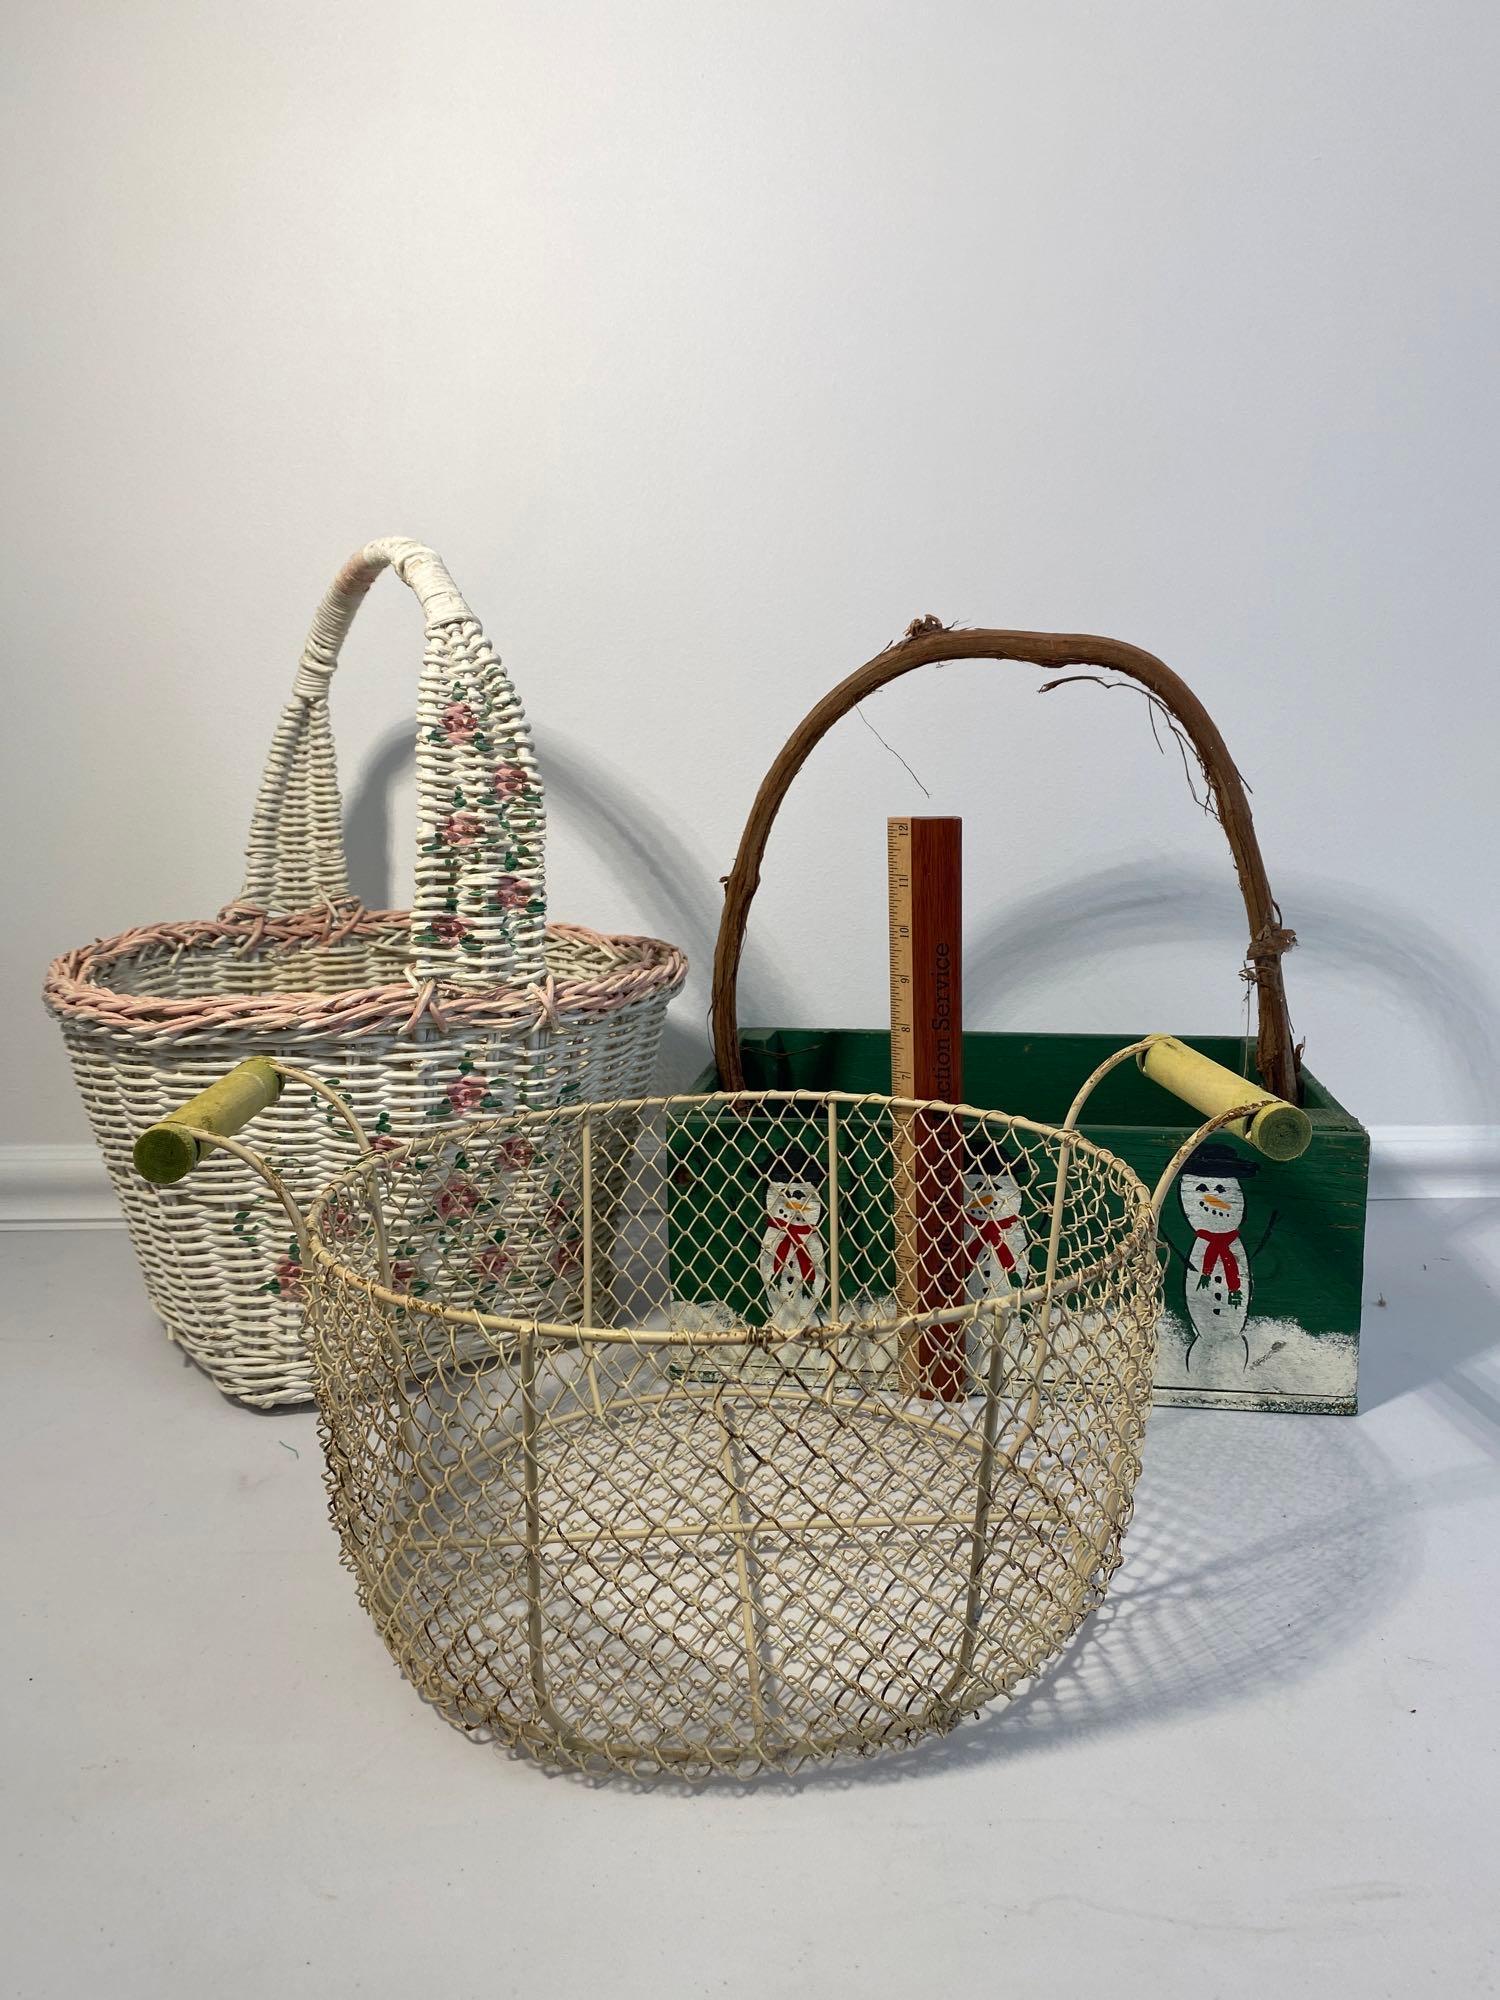 Wire, White Wicker and Christmas Box Type Basket